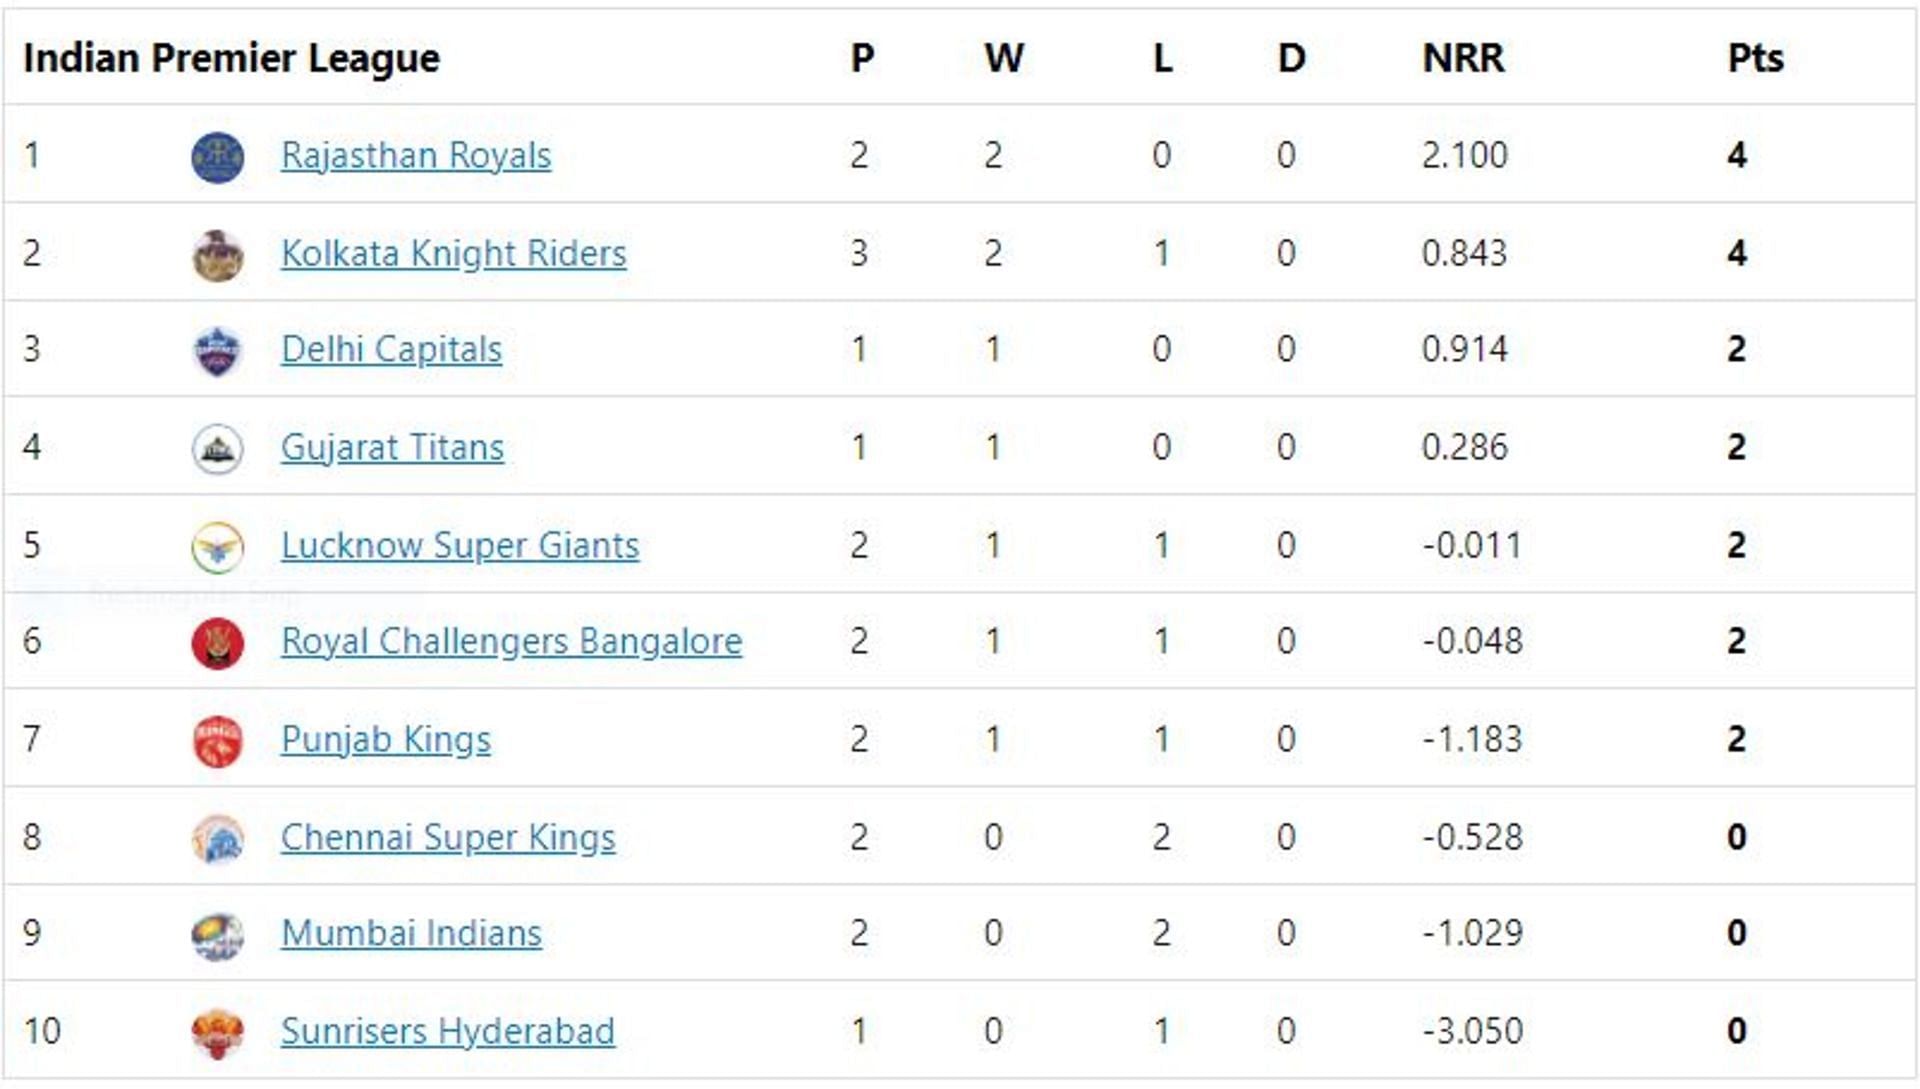 RR move to the top of the points table.